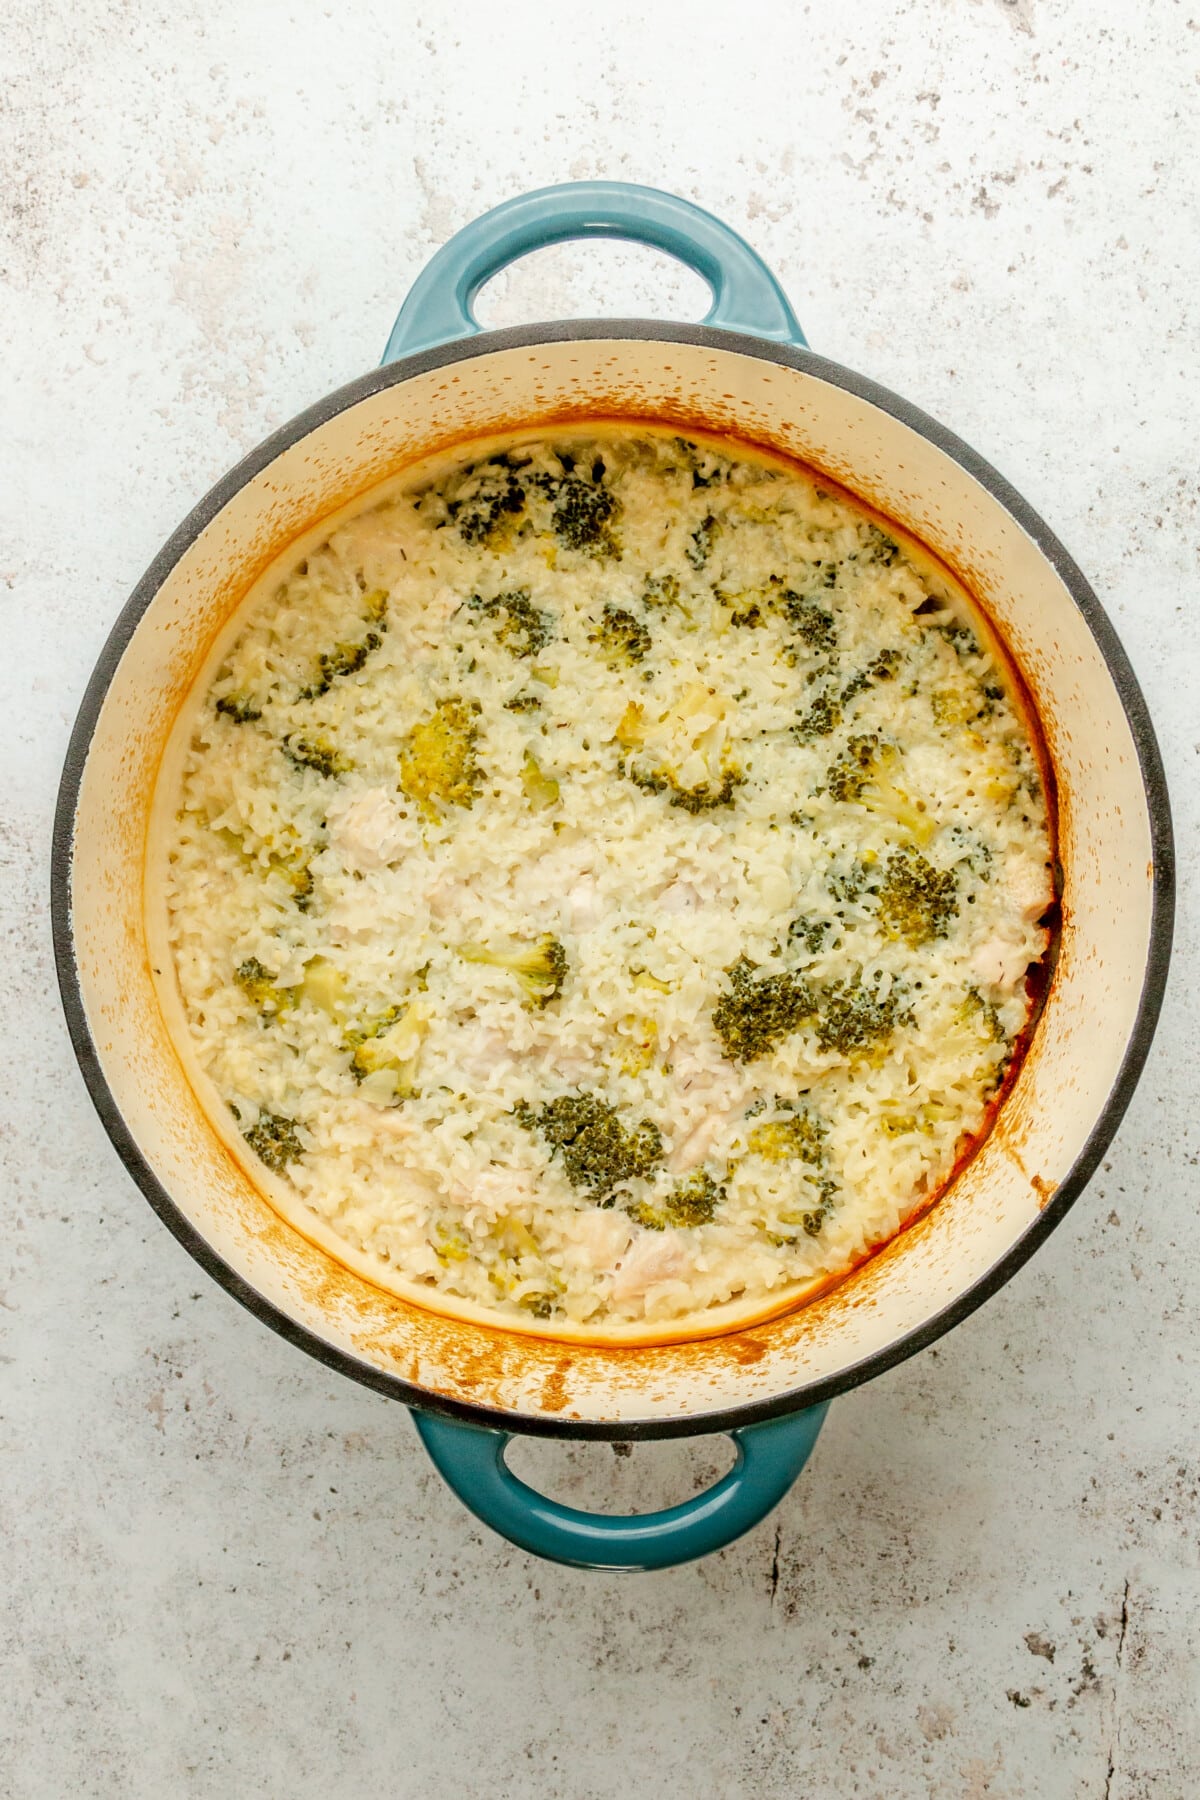 A pot filled with chicken broccoli and rice casserole sits baked in a large dutch oven on a light grey surface.